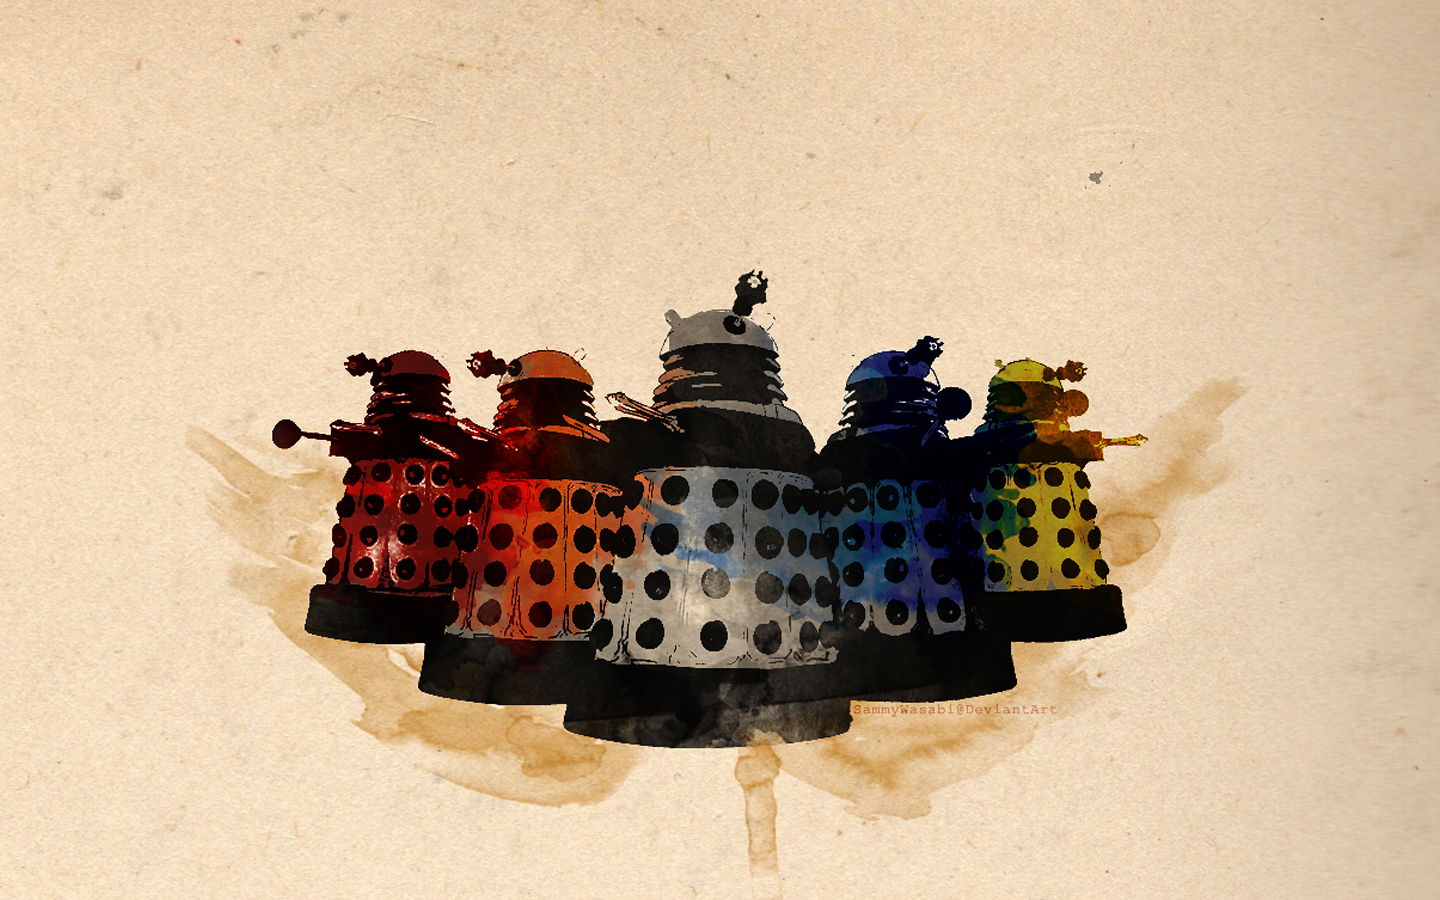 First I Give You Another Doctor Who Wallpaper With A Dalek Theme